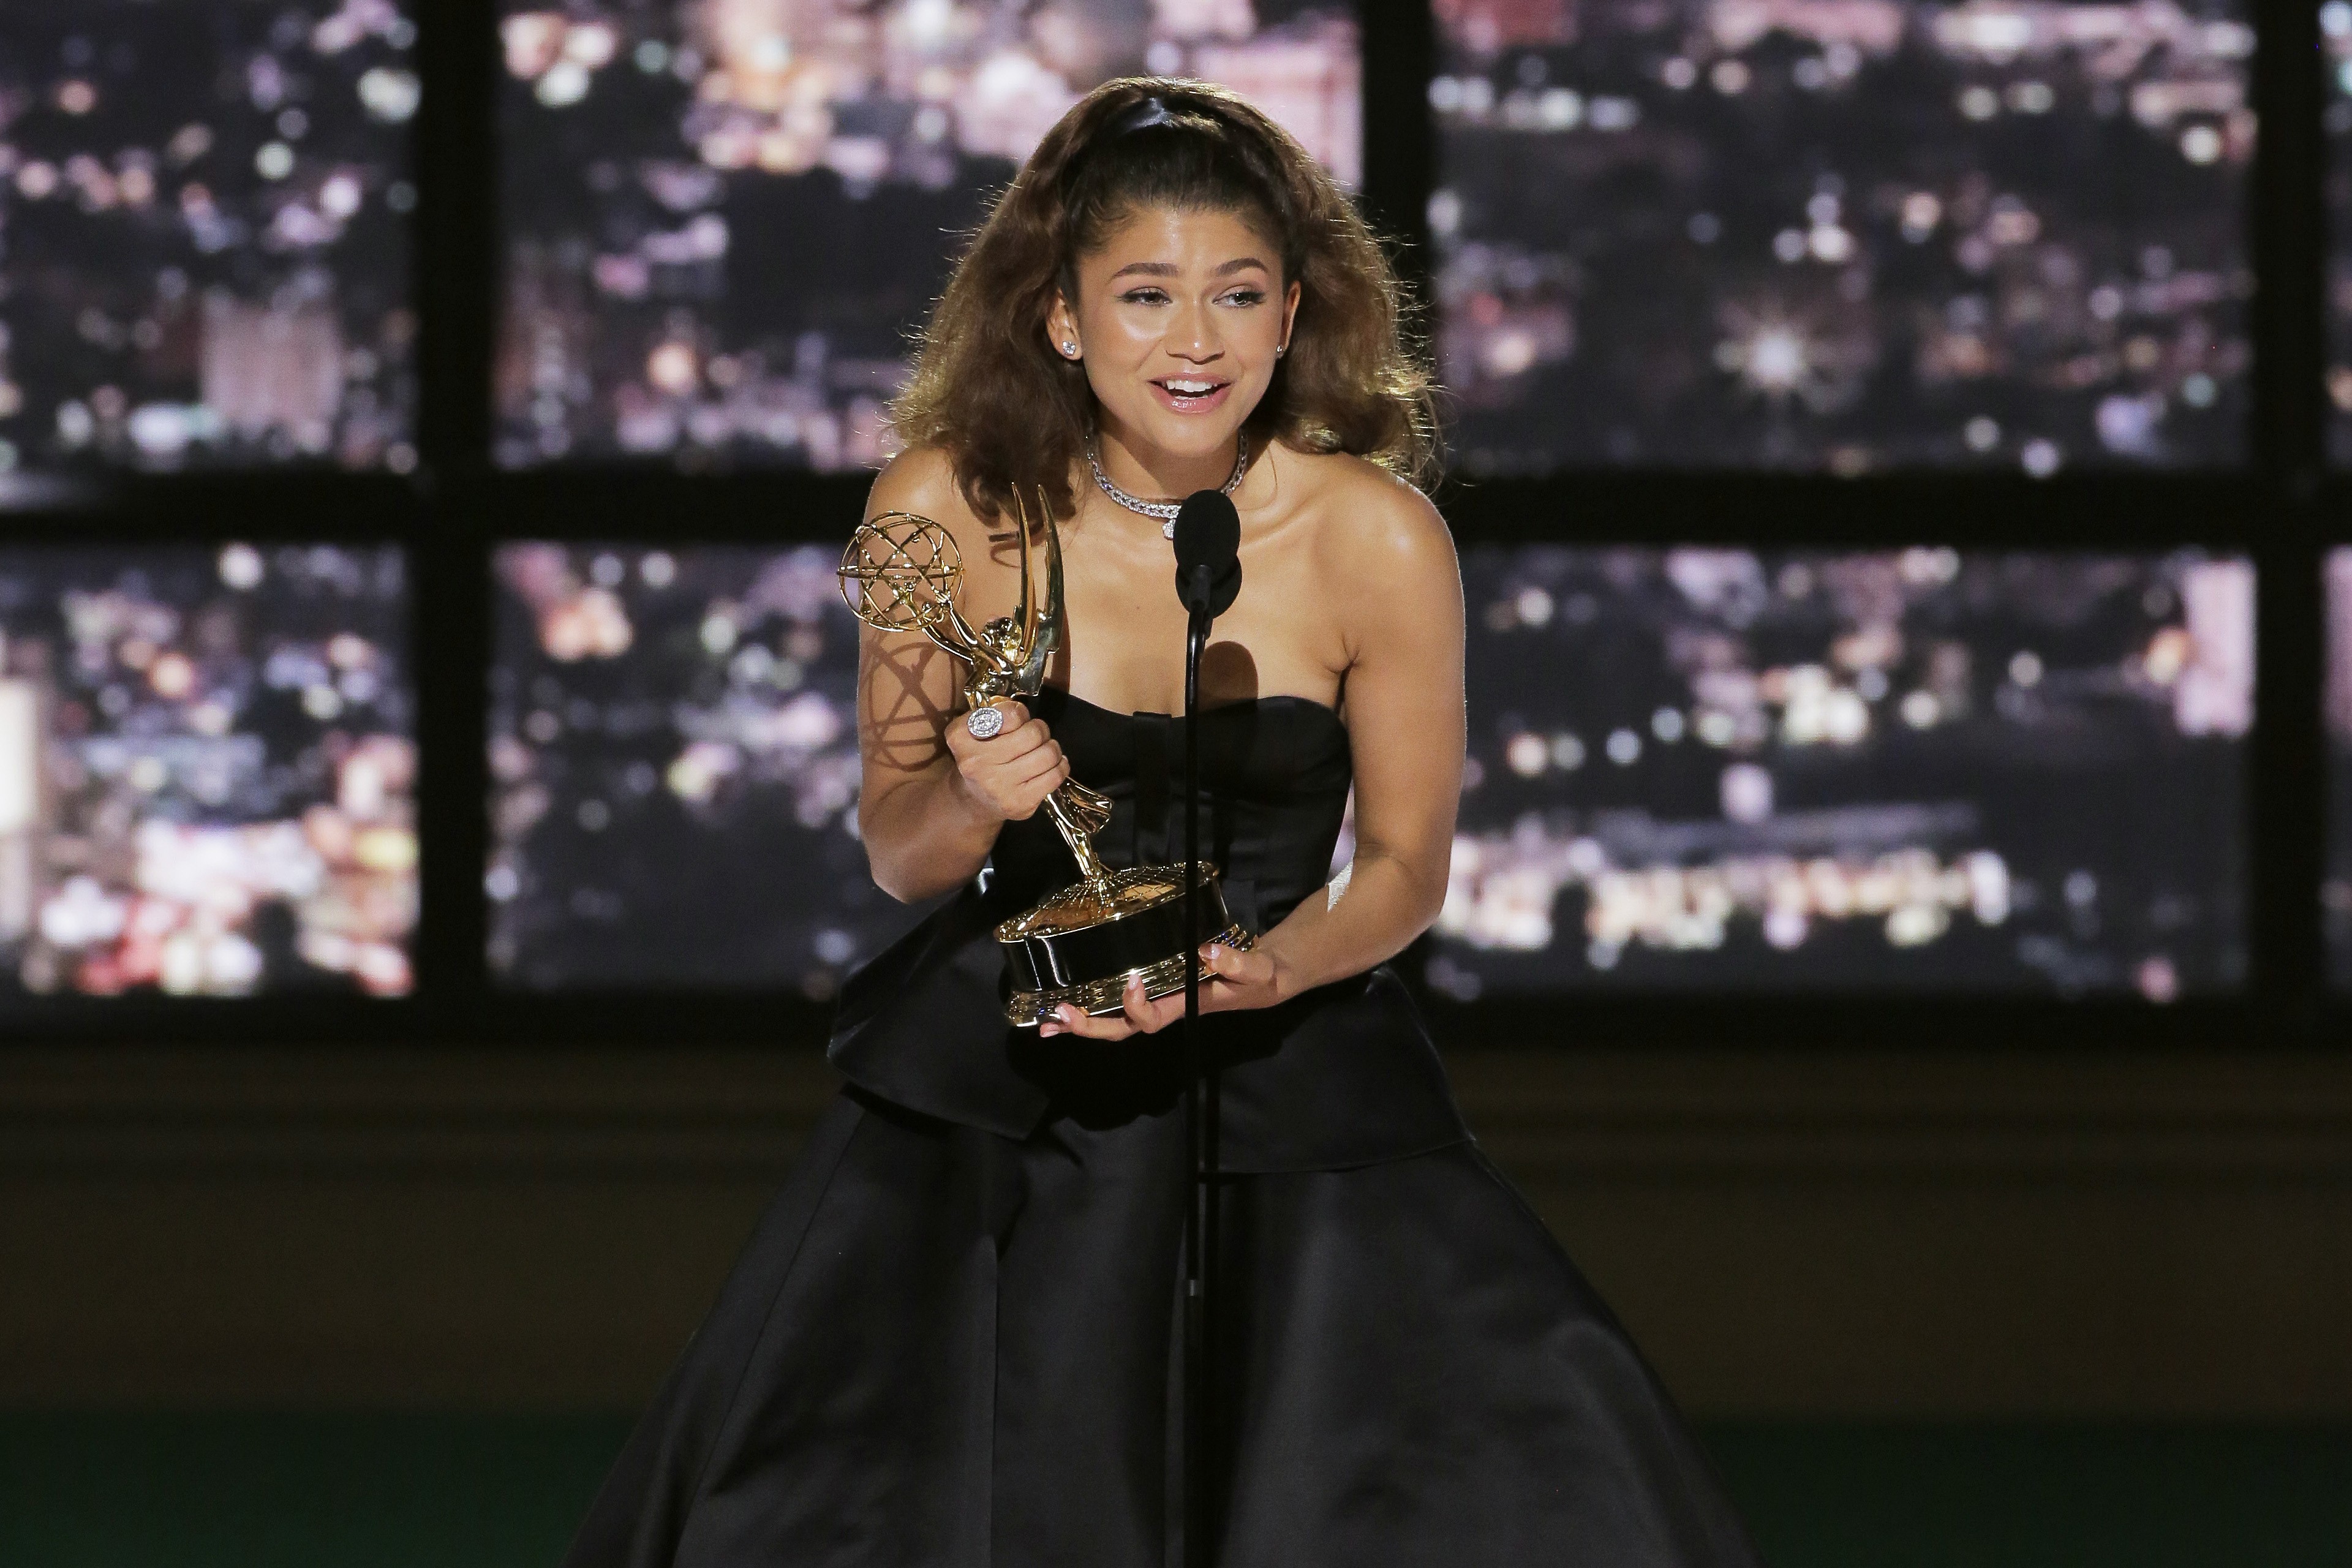 LOS ANGELES, CALIFORNIA - SEPTEMBER 12: 74th ANNUAL PRIMETIME EMMY AWARDS -- Pictured: Zendaya accepts the Outstanding Lead Actress in a Drama Series award for "Euphoria" on stage during the 74th Annual Primetime Emmy Awards held at the Microsoft Theater  (Foto: NBC via Getty Images)